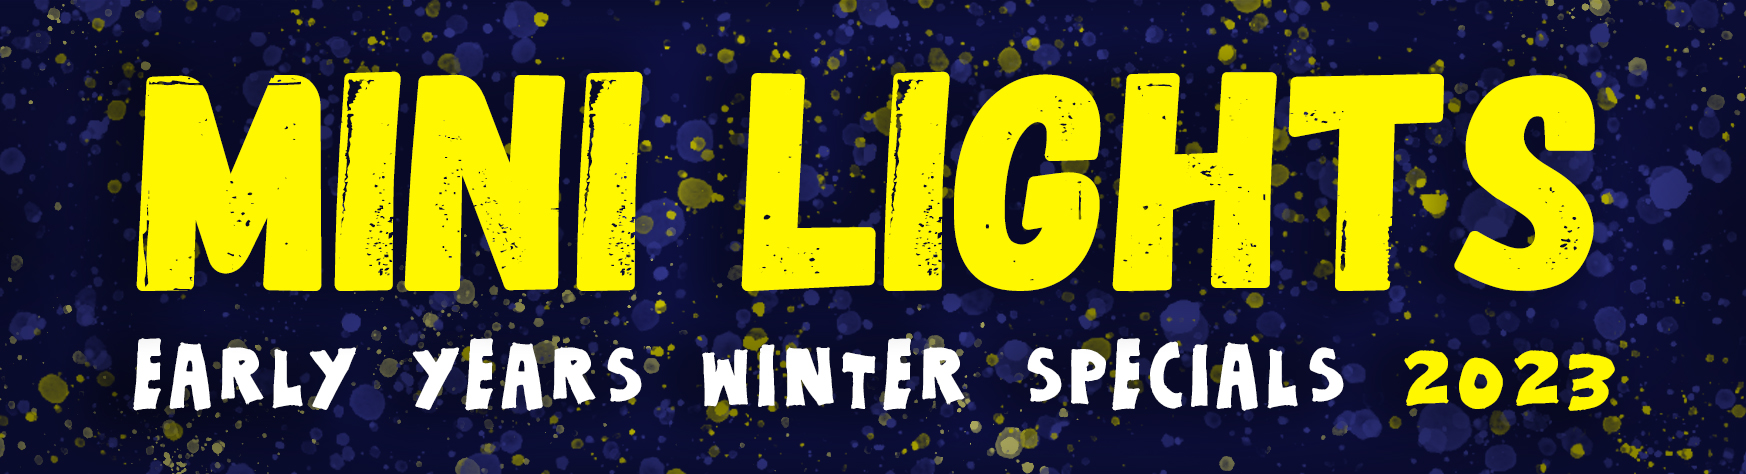 MINI LIGHTS EVENT WINTER SPECIAL EVENT 2023_1.0